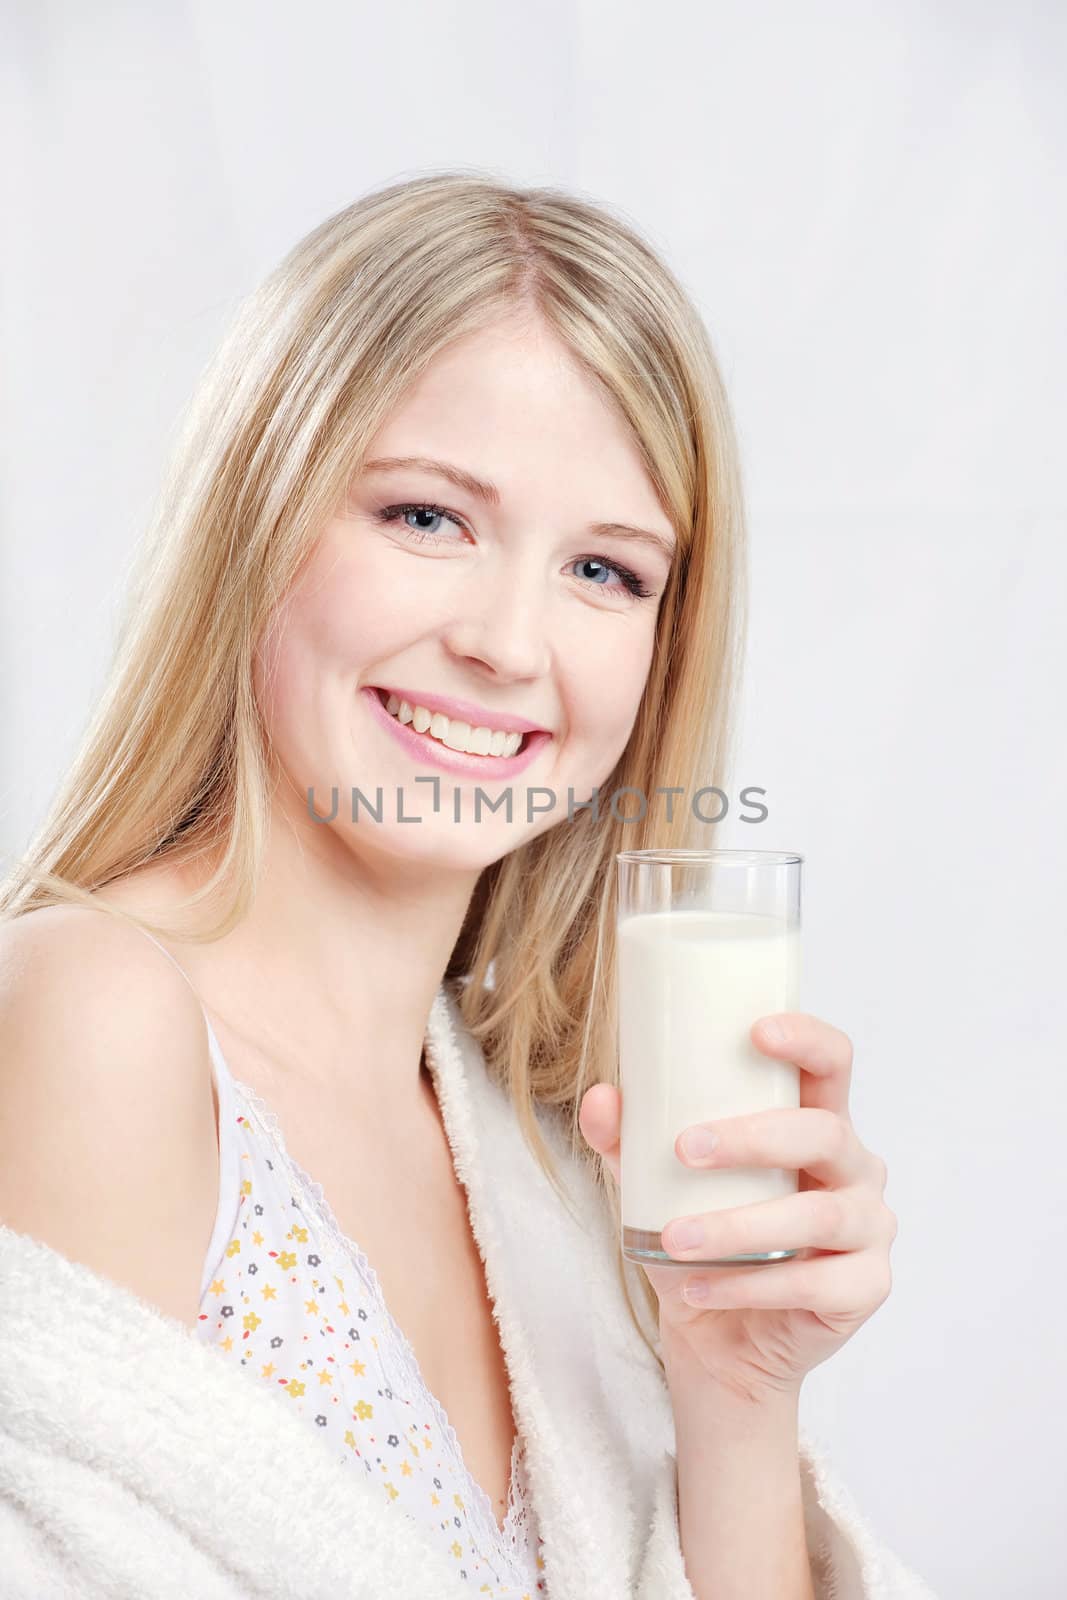 Smiling blond hair woman holding glass of milk